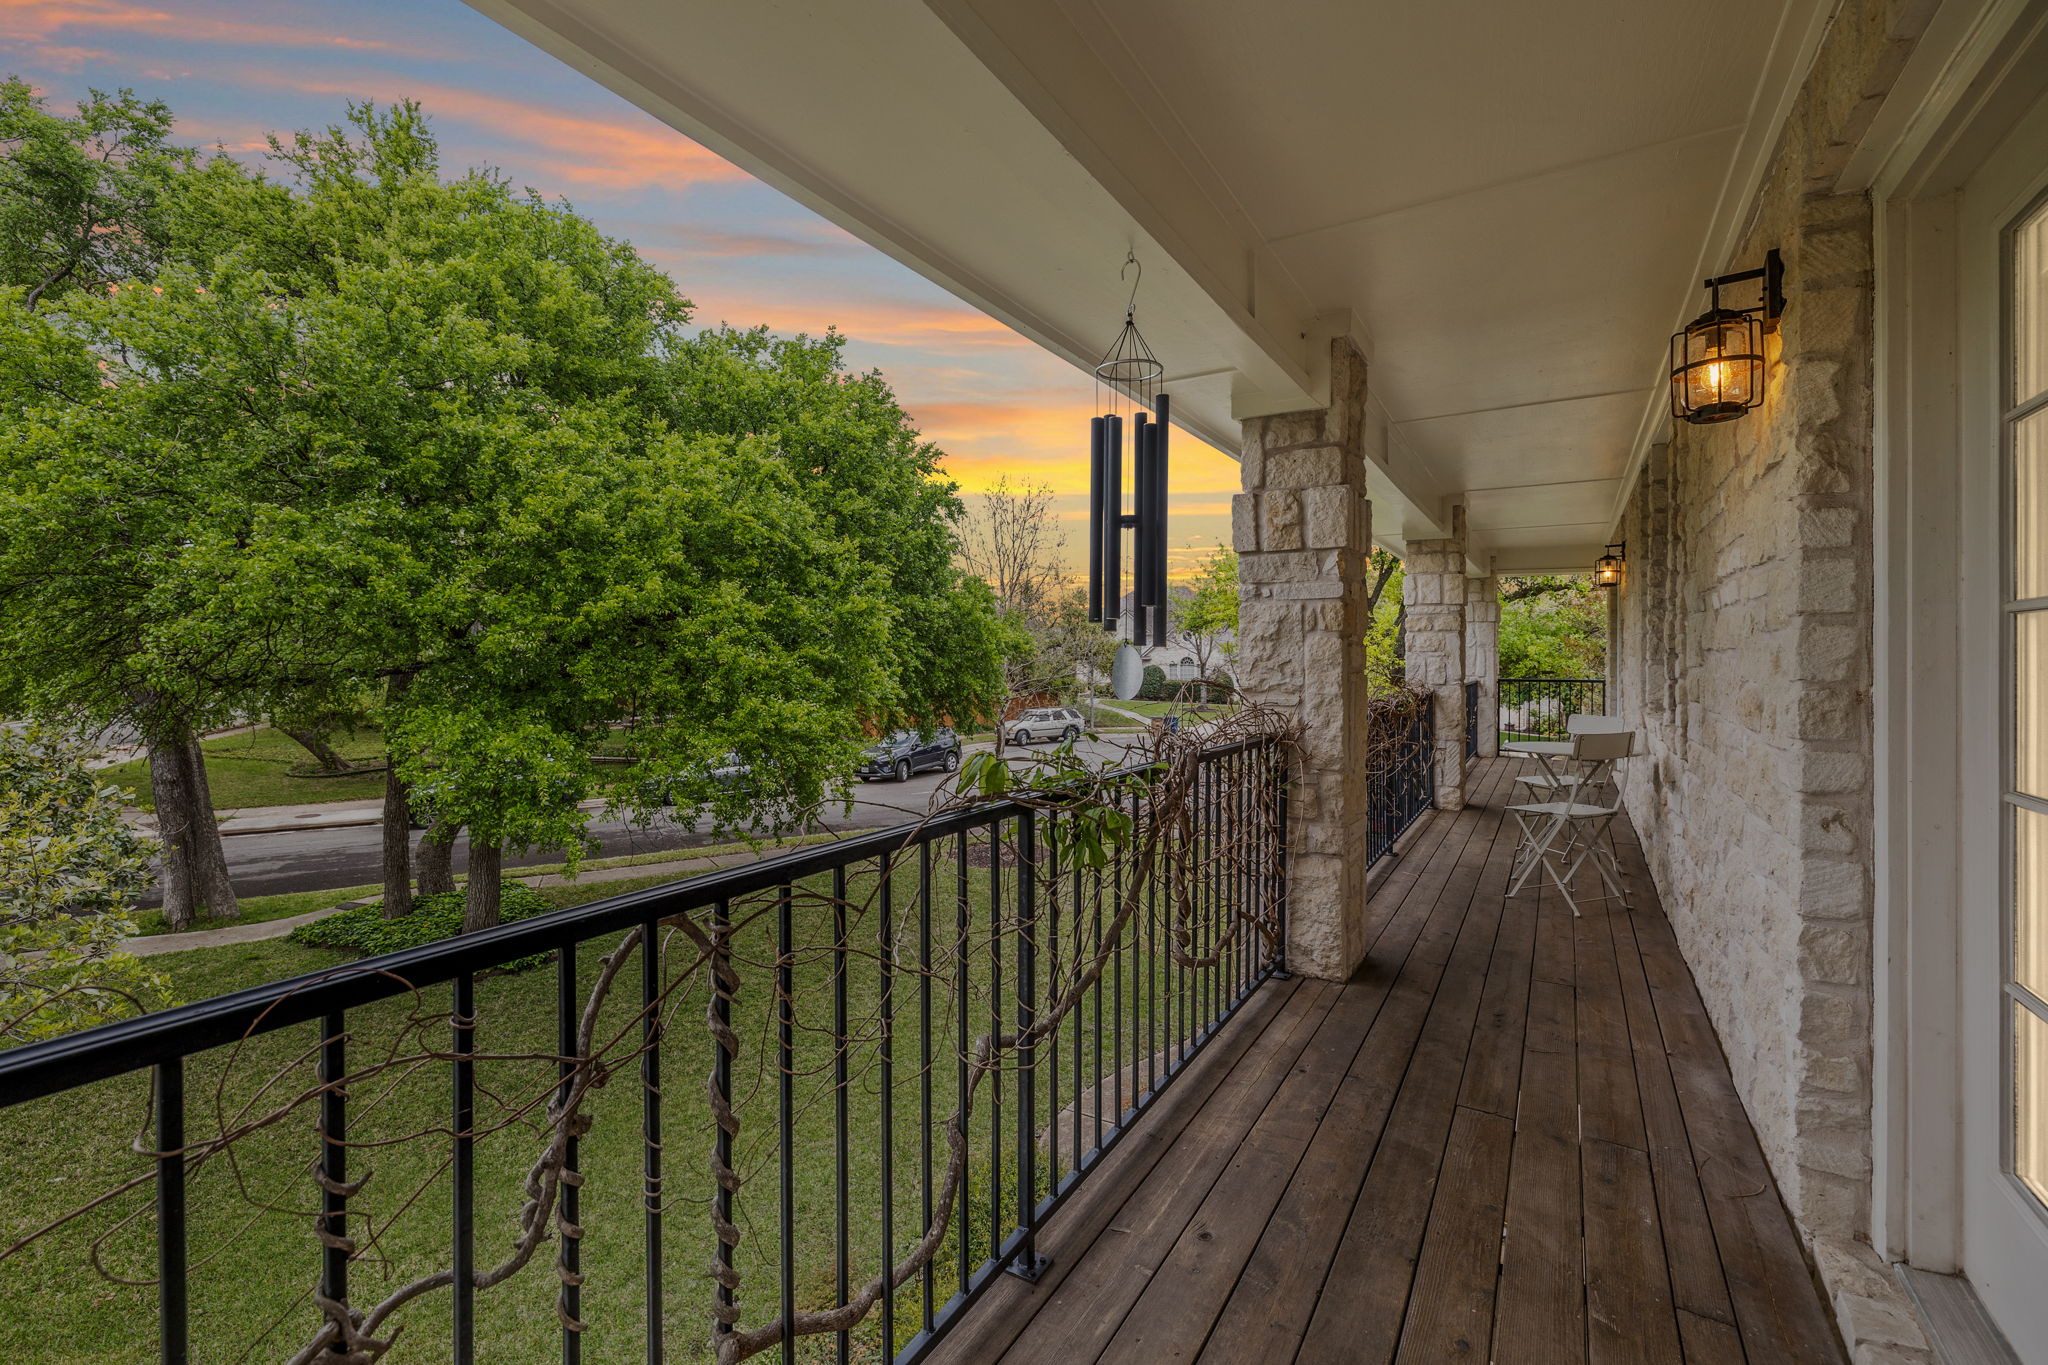 Enjoy an evening glass of wine from your relaxing upstairs balcony.